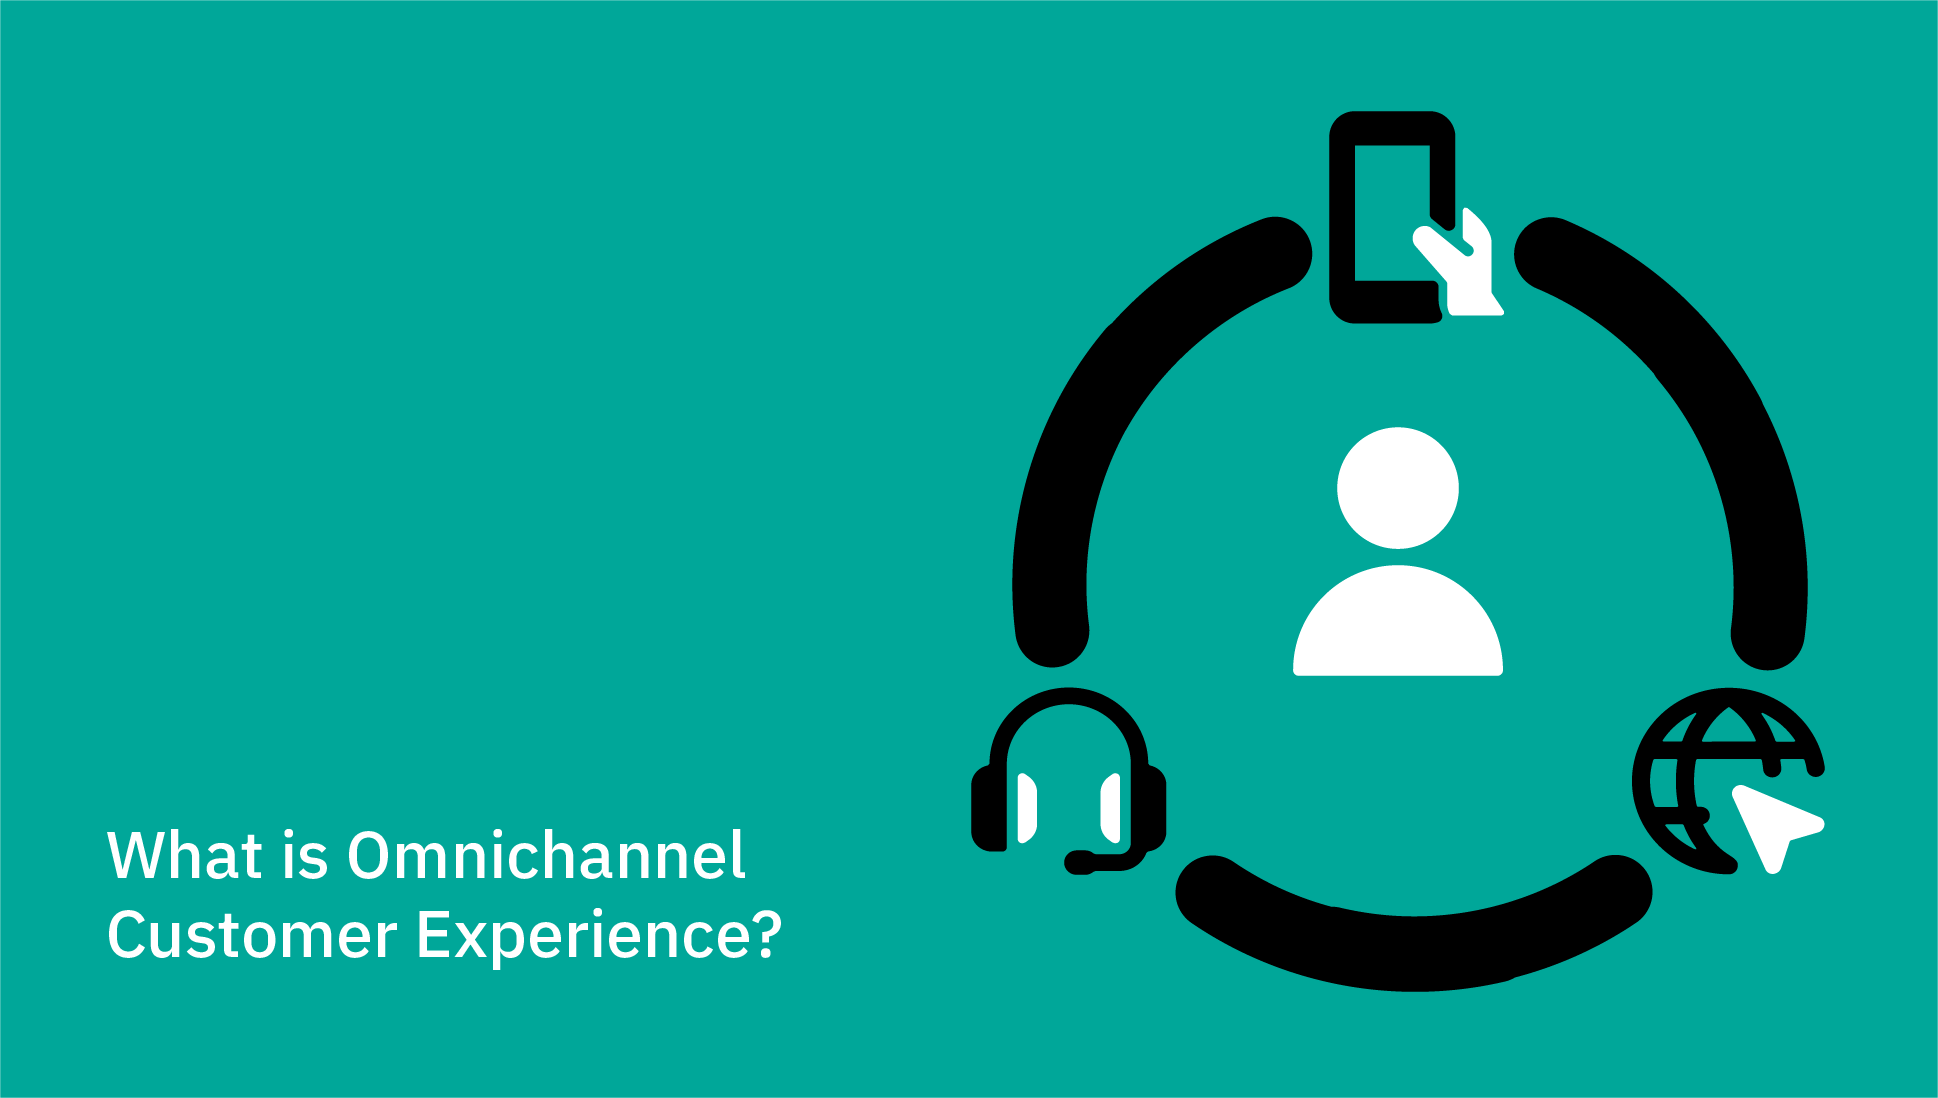 Infographic showing customer-focused omnichannel